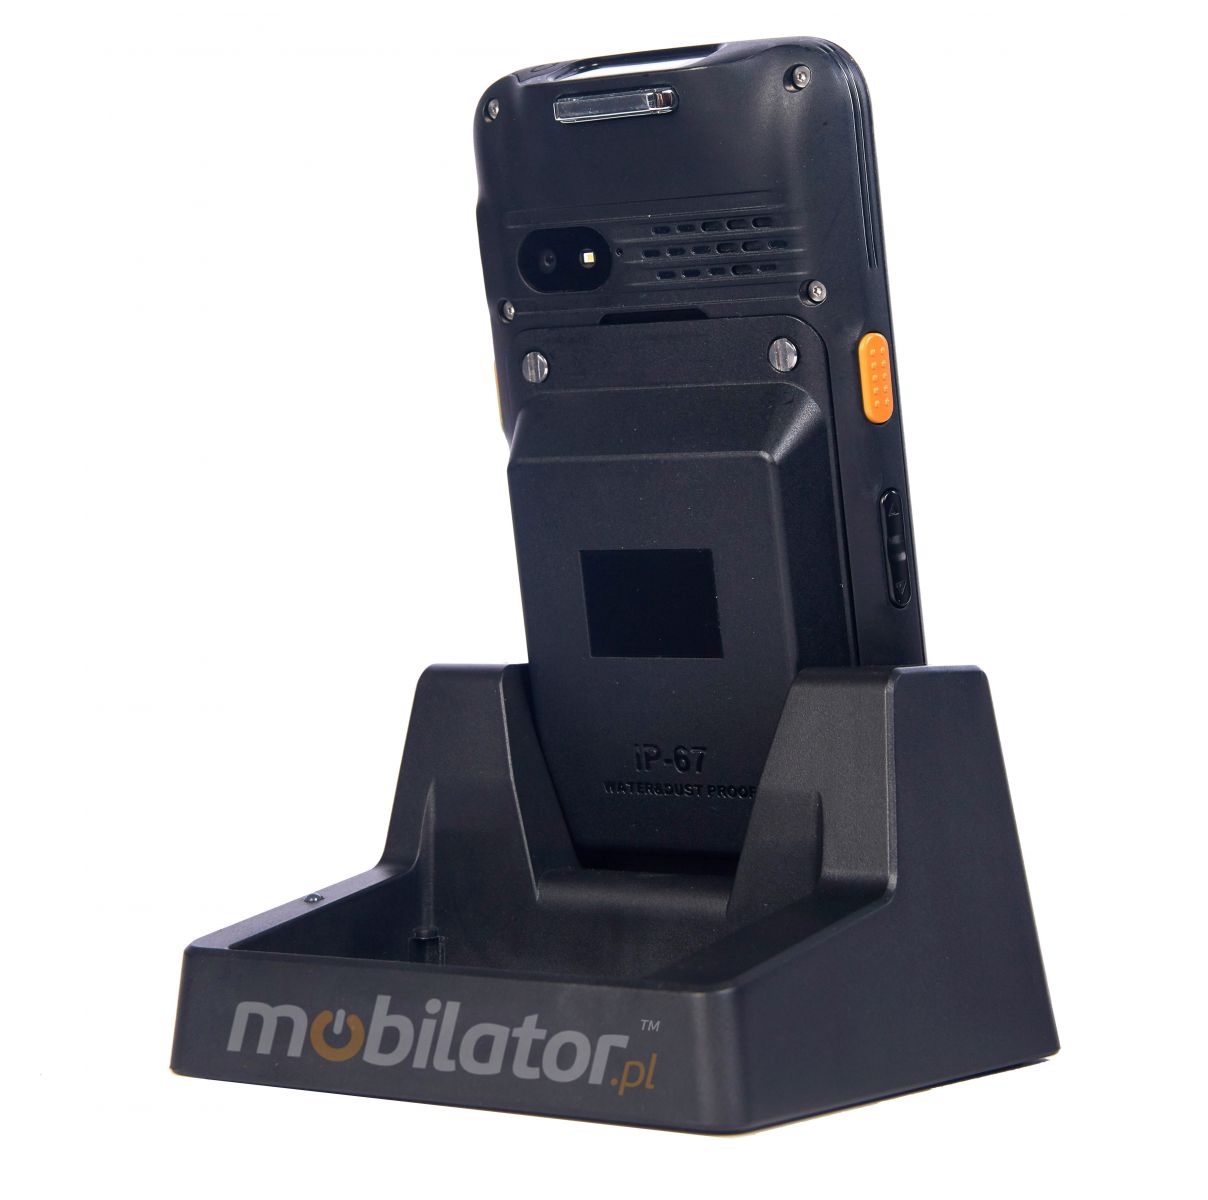 MobiPad V77 v.5 - Industrial data collector with a pistol grip (IP67) with extended RAM and ROM memory